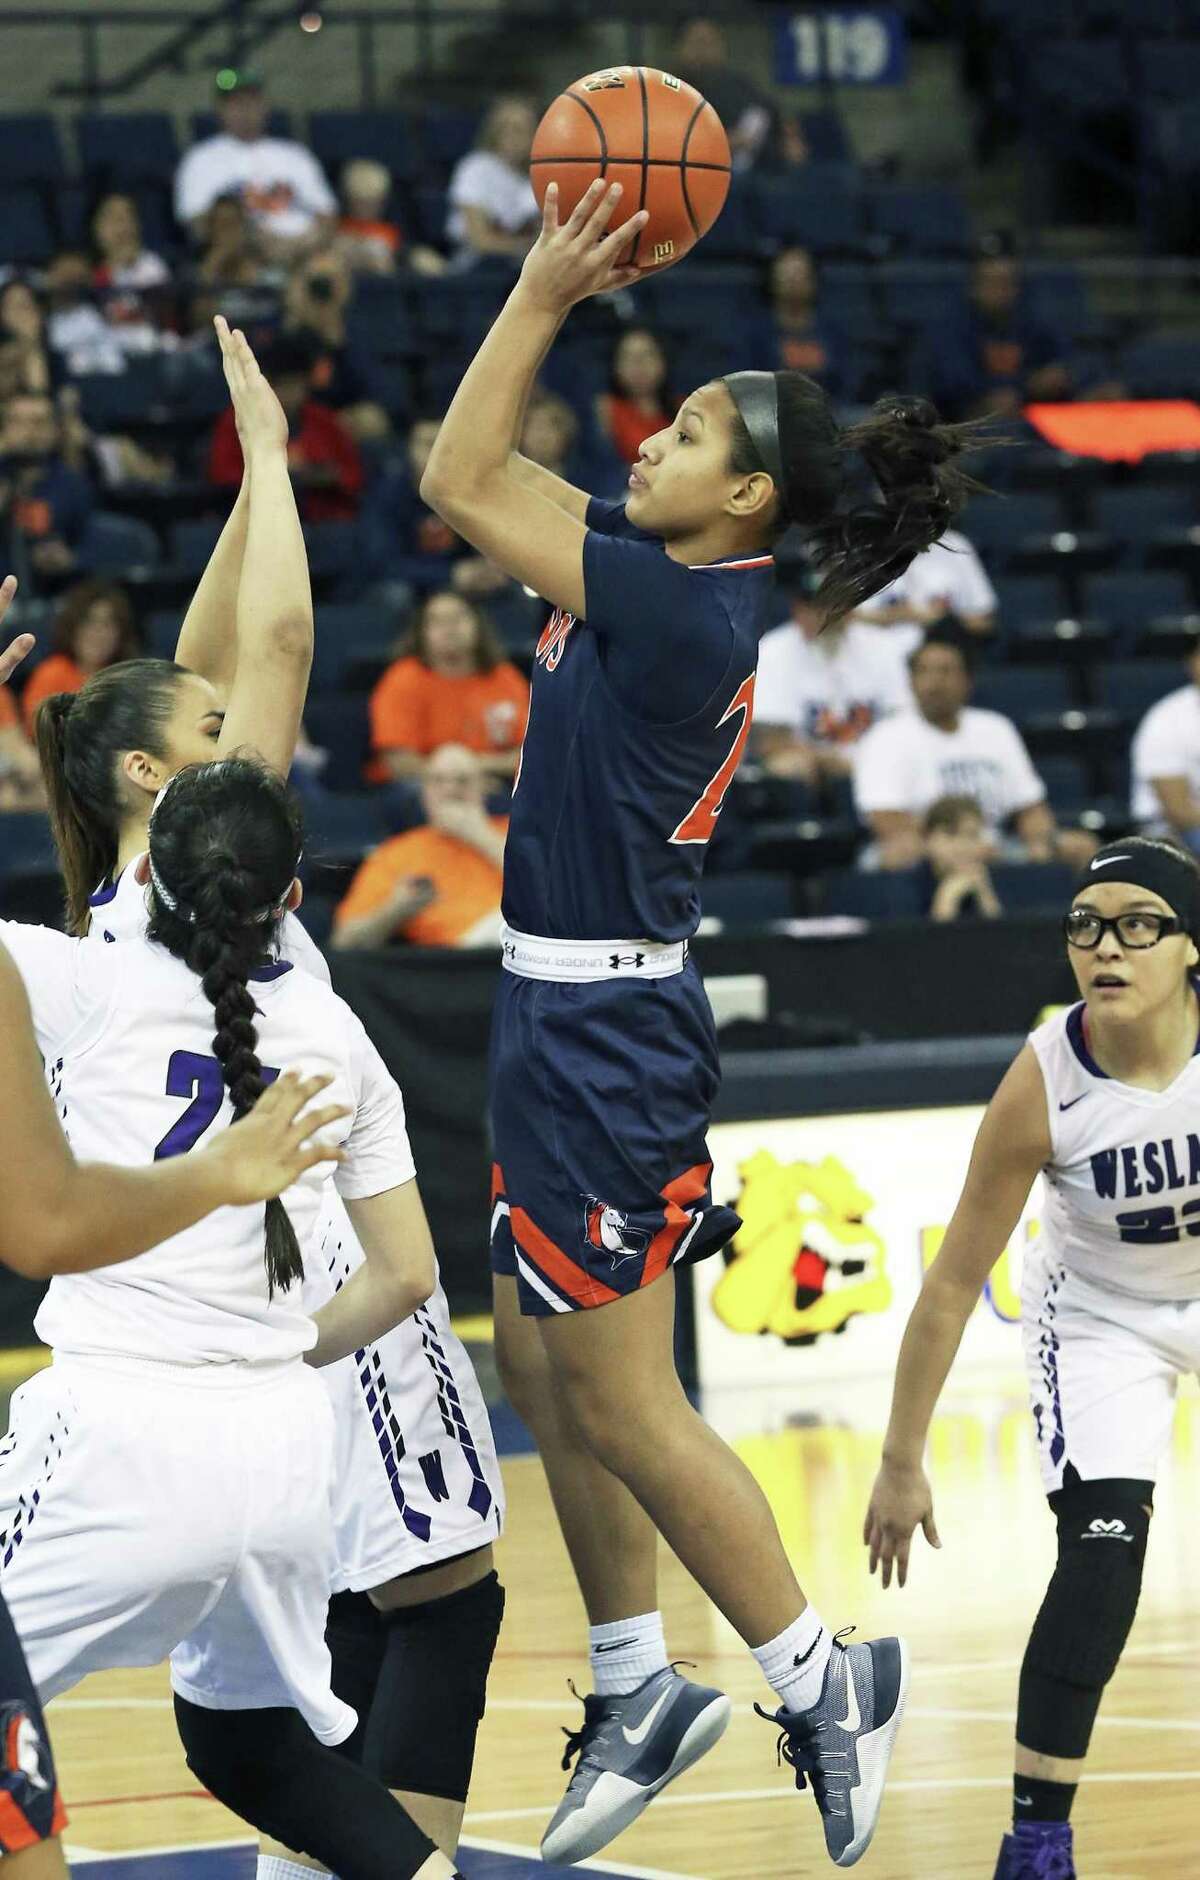 Brandies sophomore guard Arriana Villa averaged 19 points and 8 rebounds as the Broncos opened District 28-6A play with victories against Stevens and Taft. For her efforts she was named our Player of the Week.